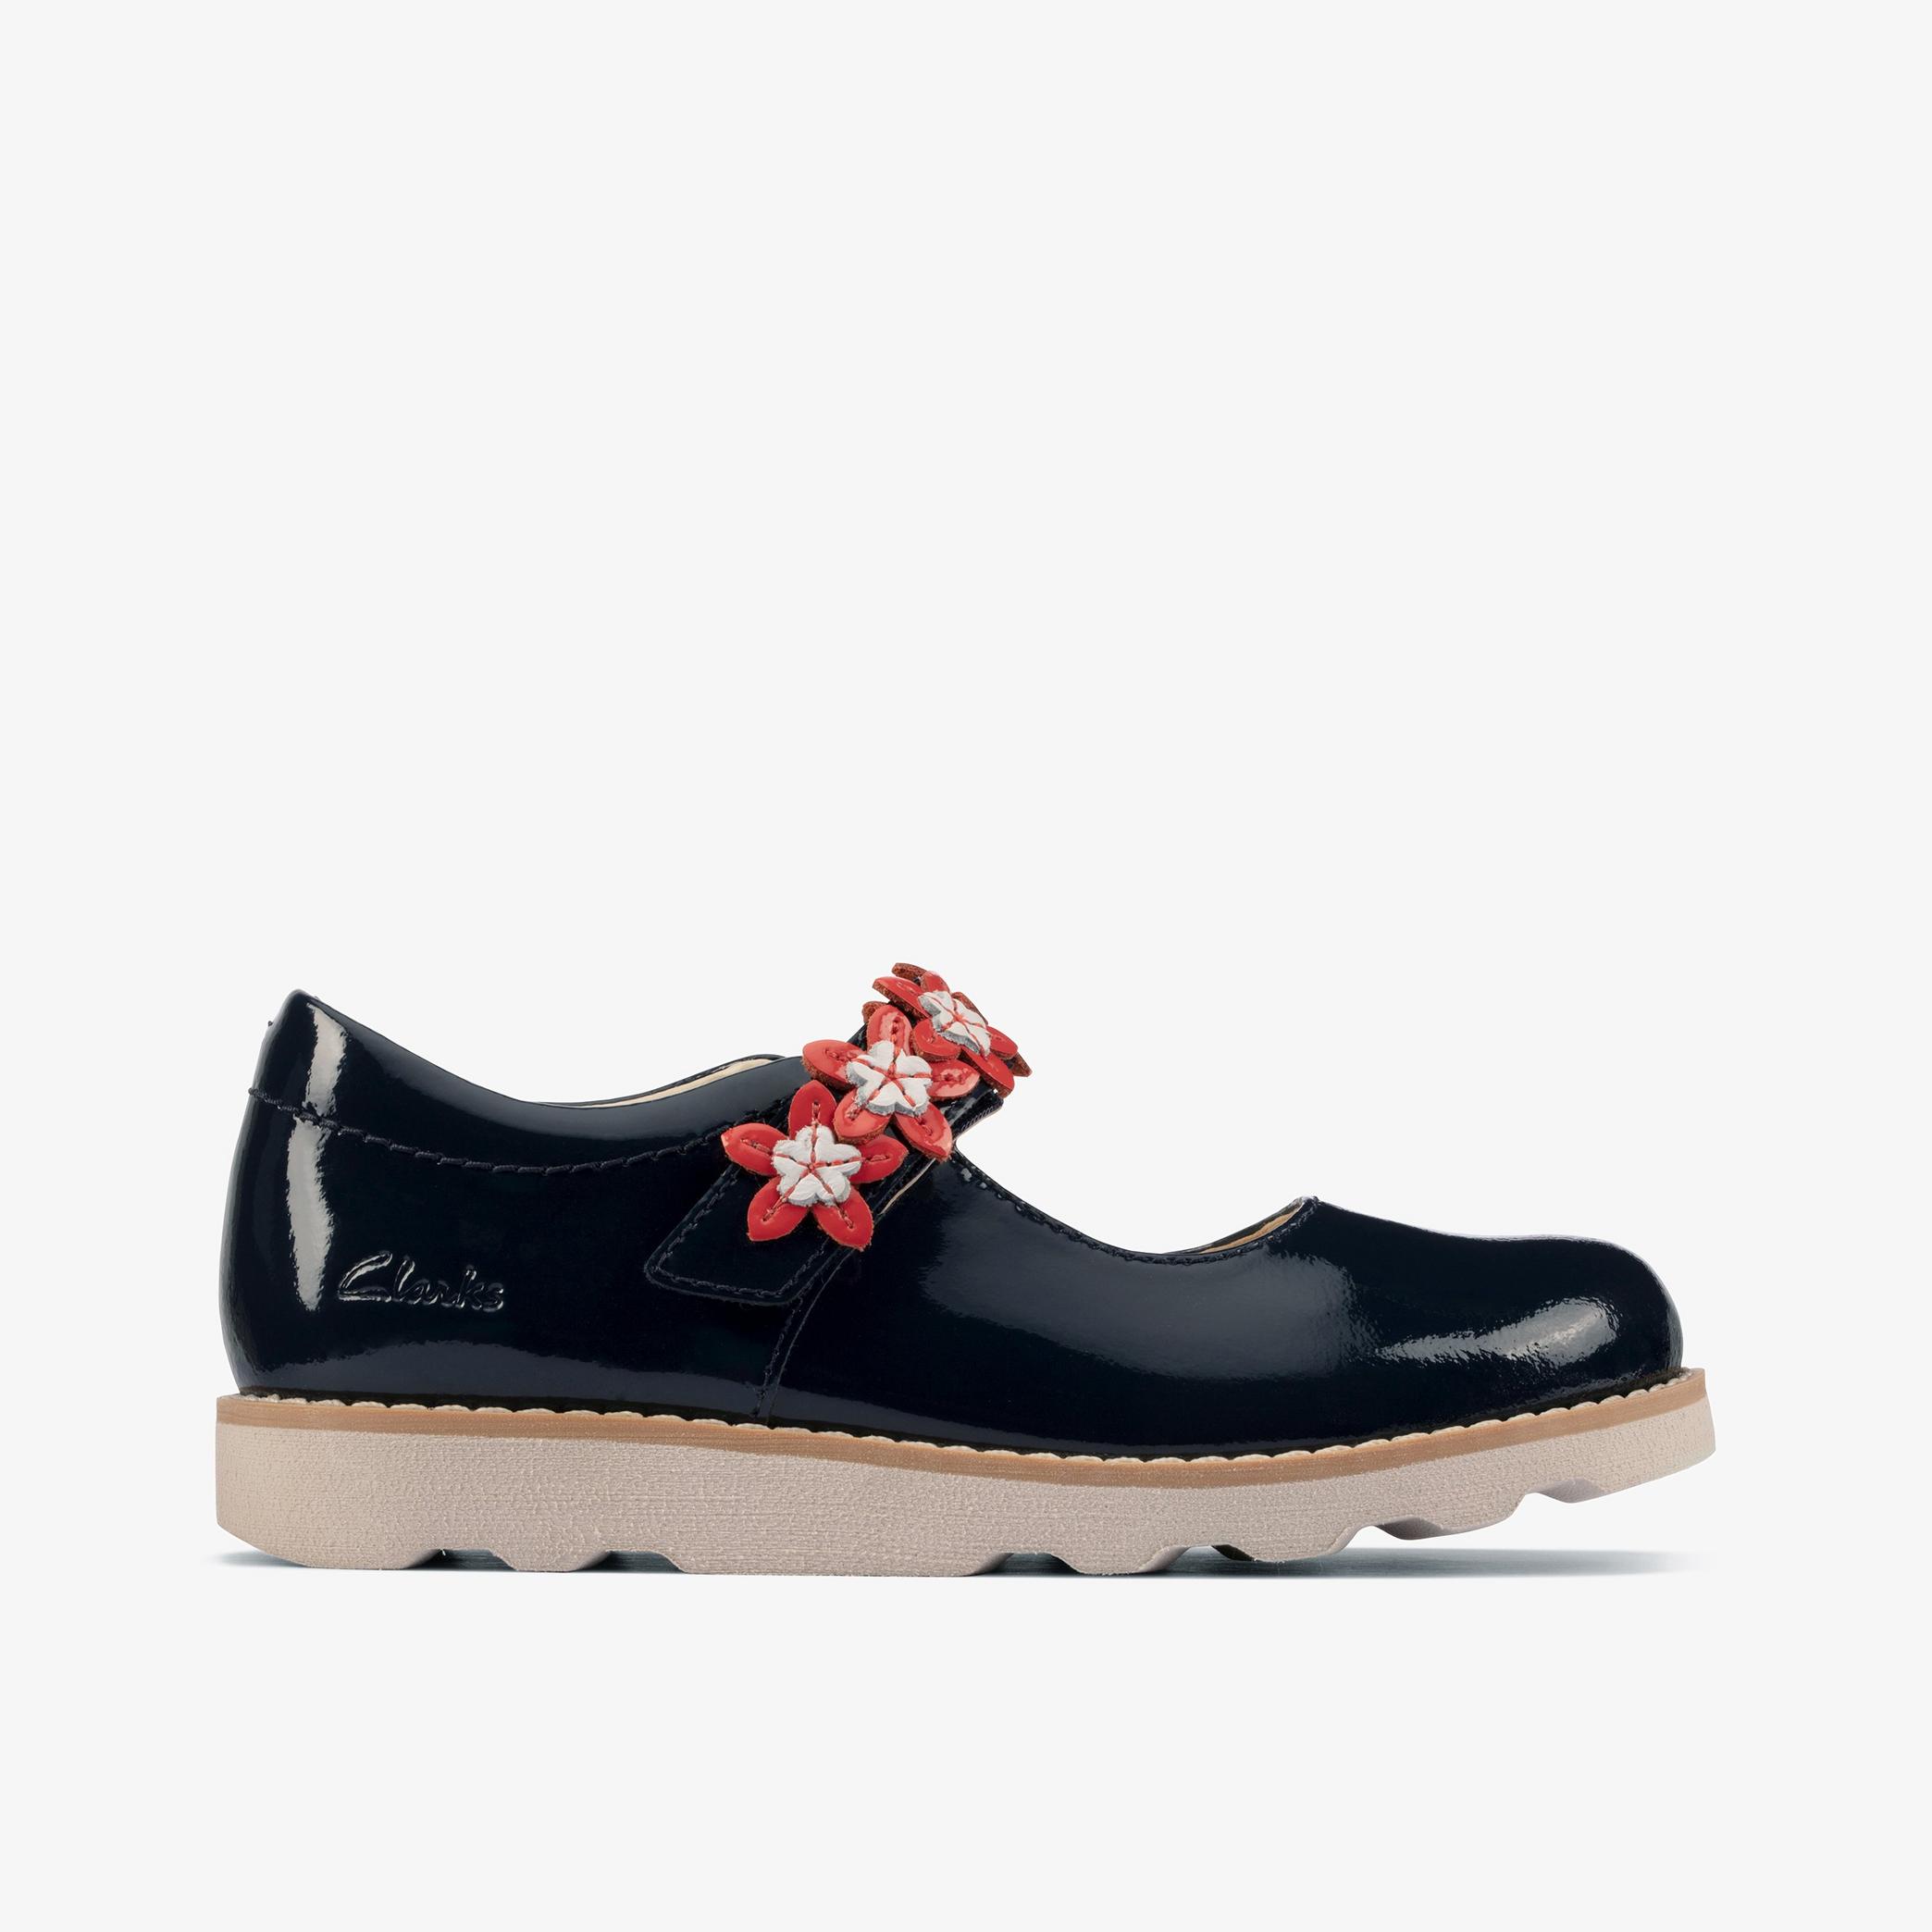 Crown Petal Kid Navy Patent Mary Jane Shoes, view 1 of 6